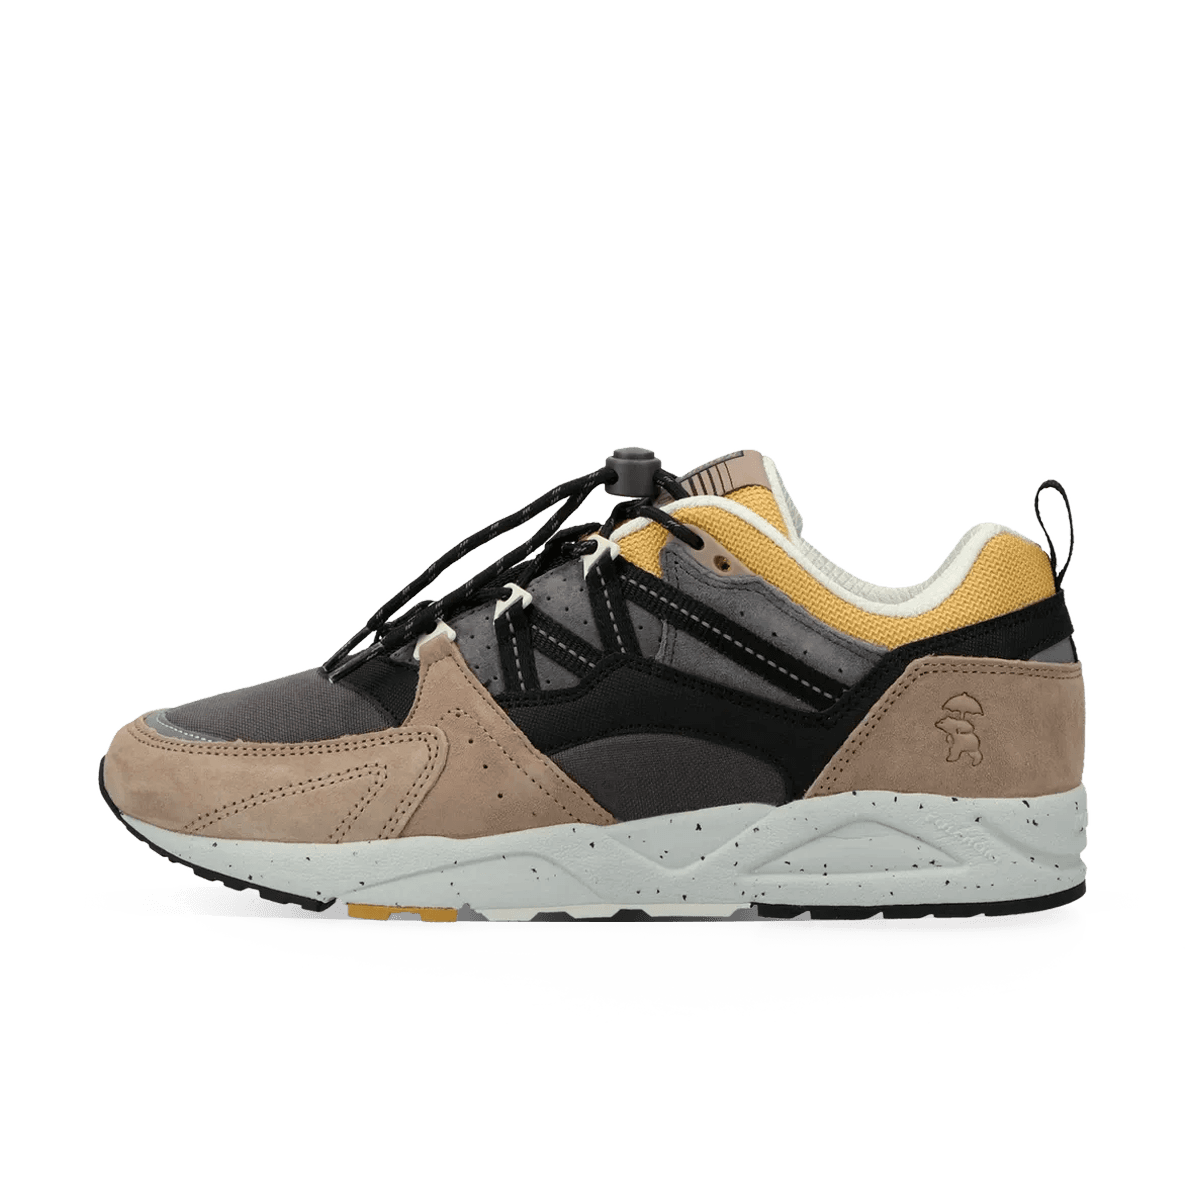 Knirps x Karhu Fusion 2.0 'Silver Mink' -  Shitty Weather Pack